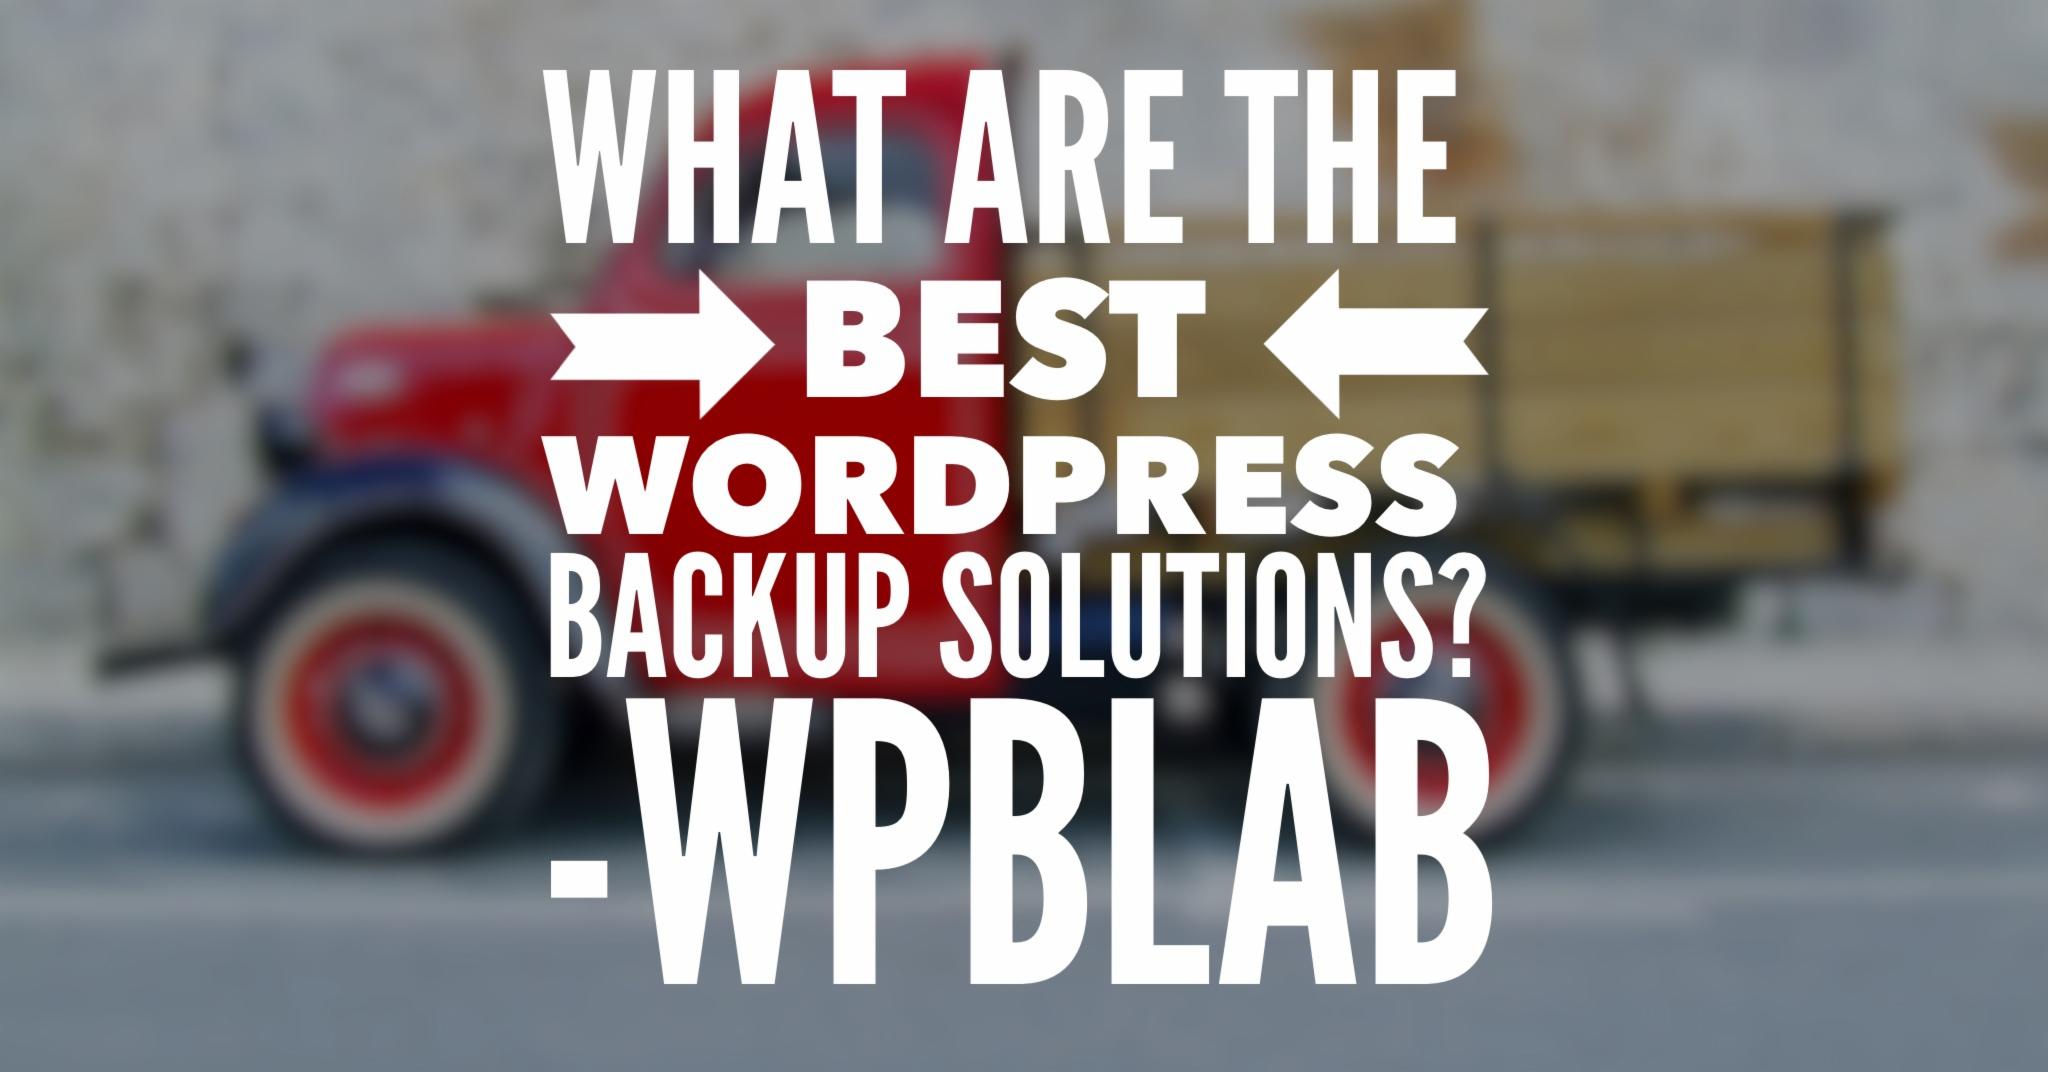 EP31 - What are the best #WordPress backup solutions? - #WPblab 1